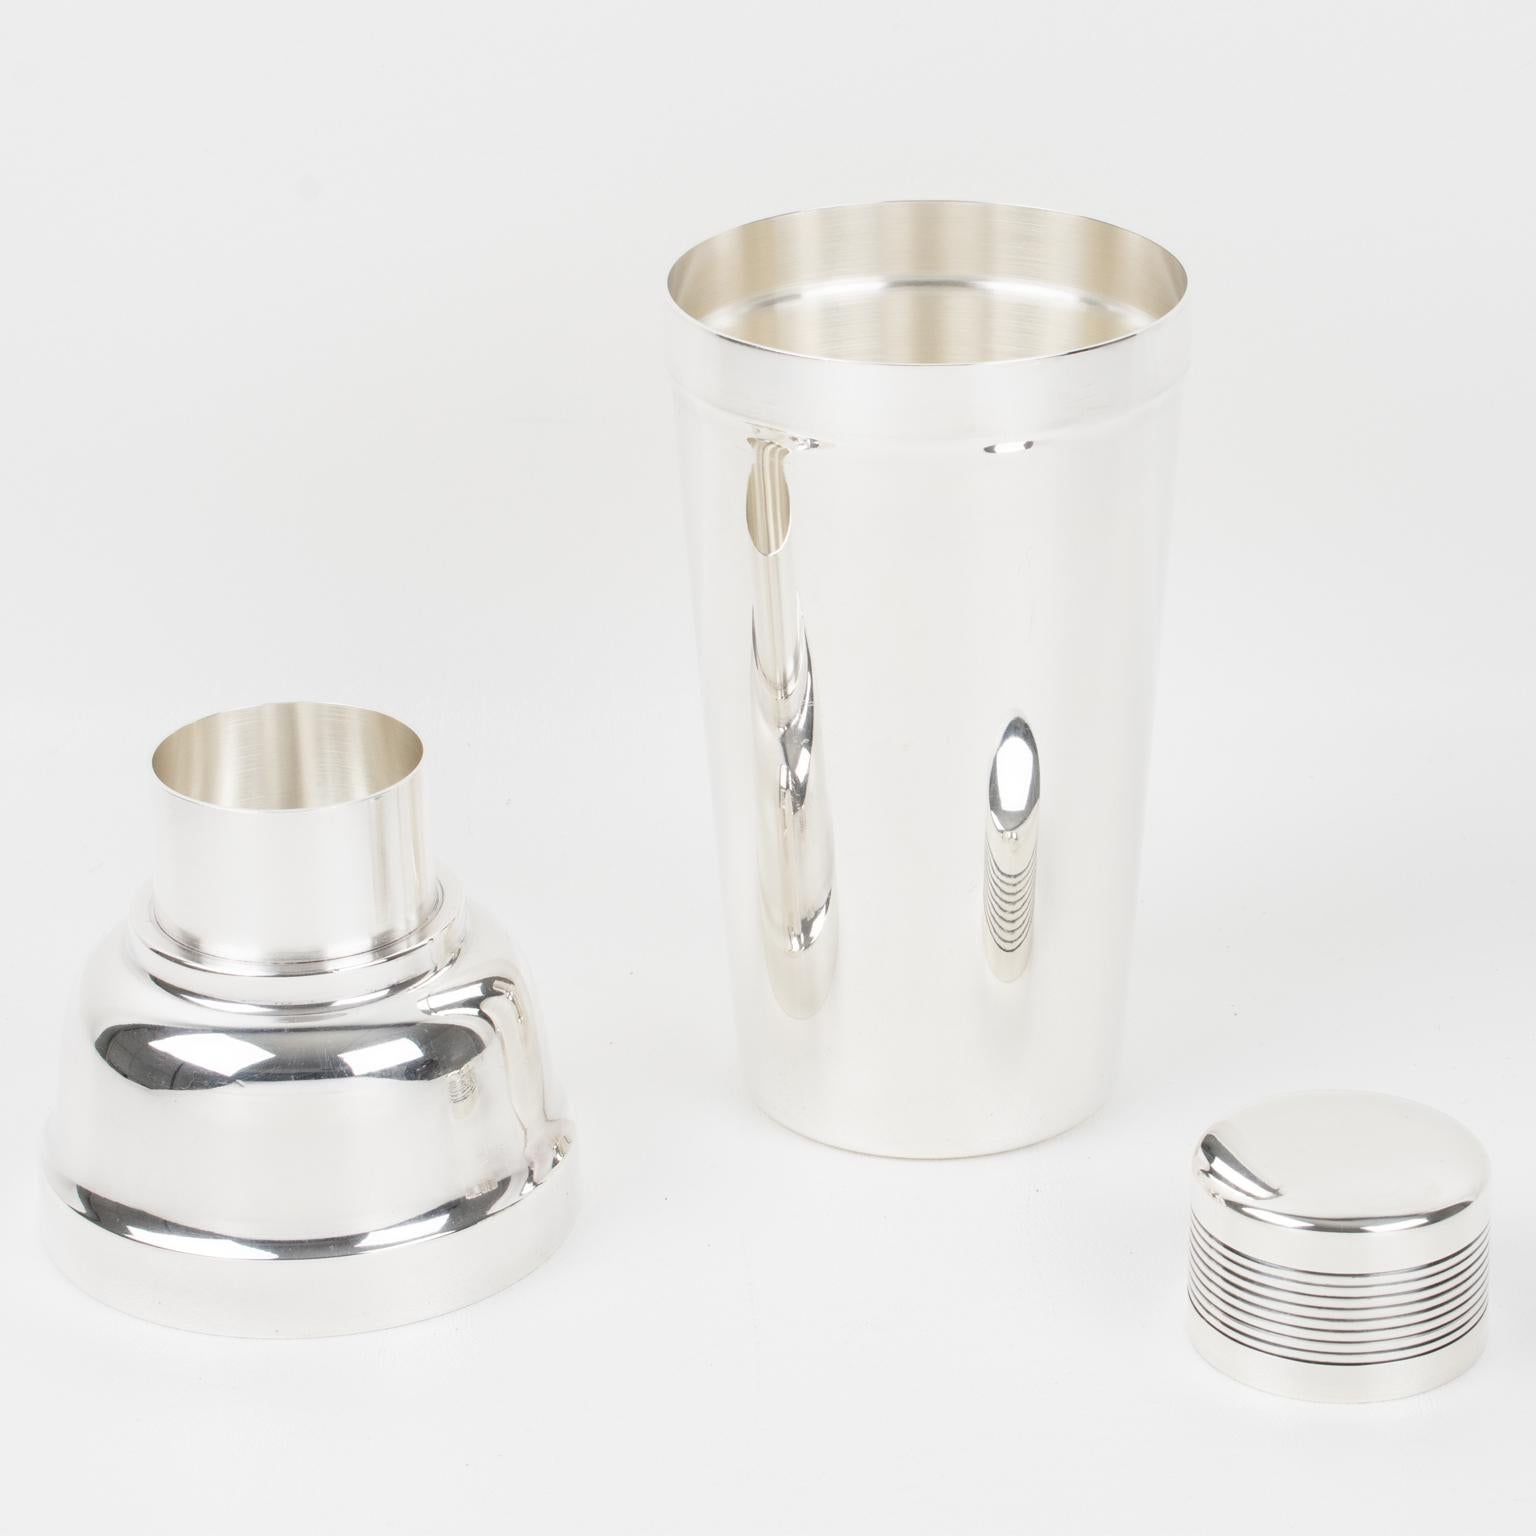 Elegant French Art Deco silver plated cylindrical cocktail or Martini shaker by silversmith Ercuis, Paris. Three-sectioned designed cocktail shaker with removable cap and strainer. Lovely Art Deco flair with geometric design and striped carving on